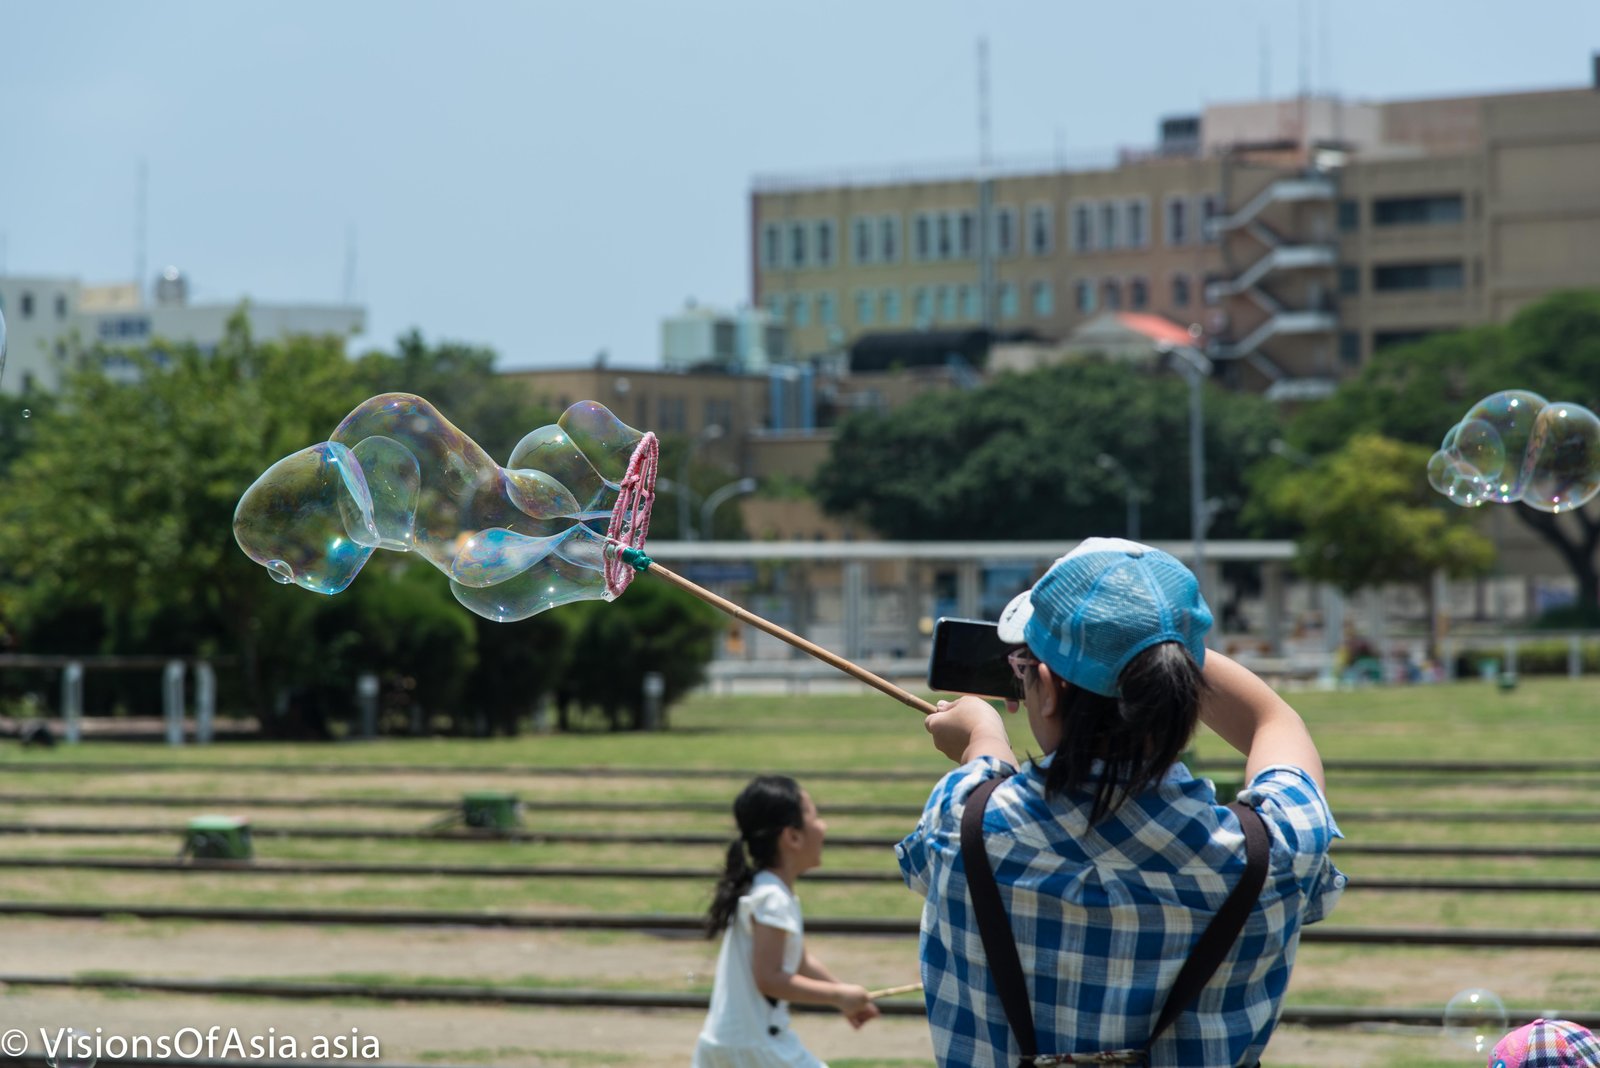 Playing with Bubbles at Hamsan railway museum